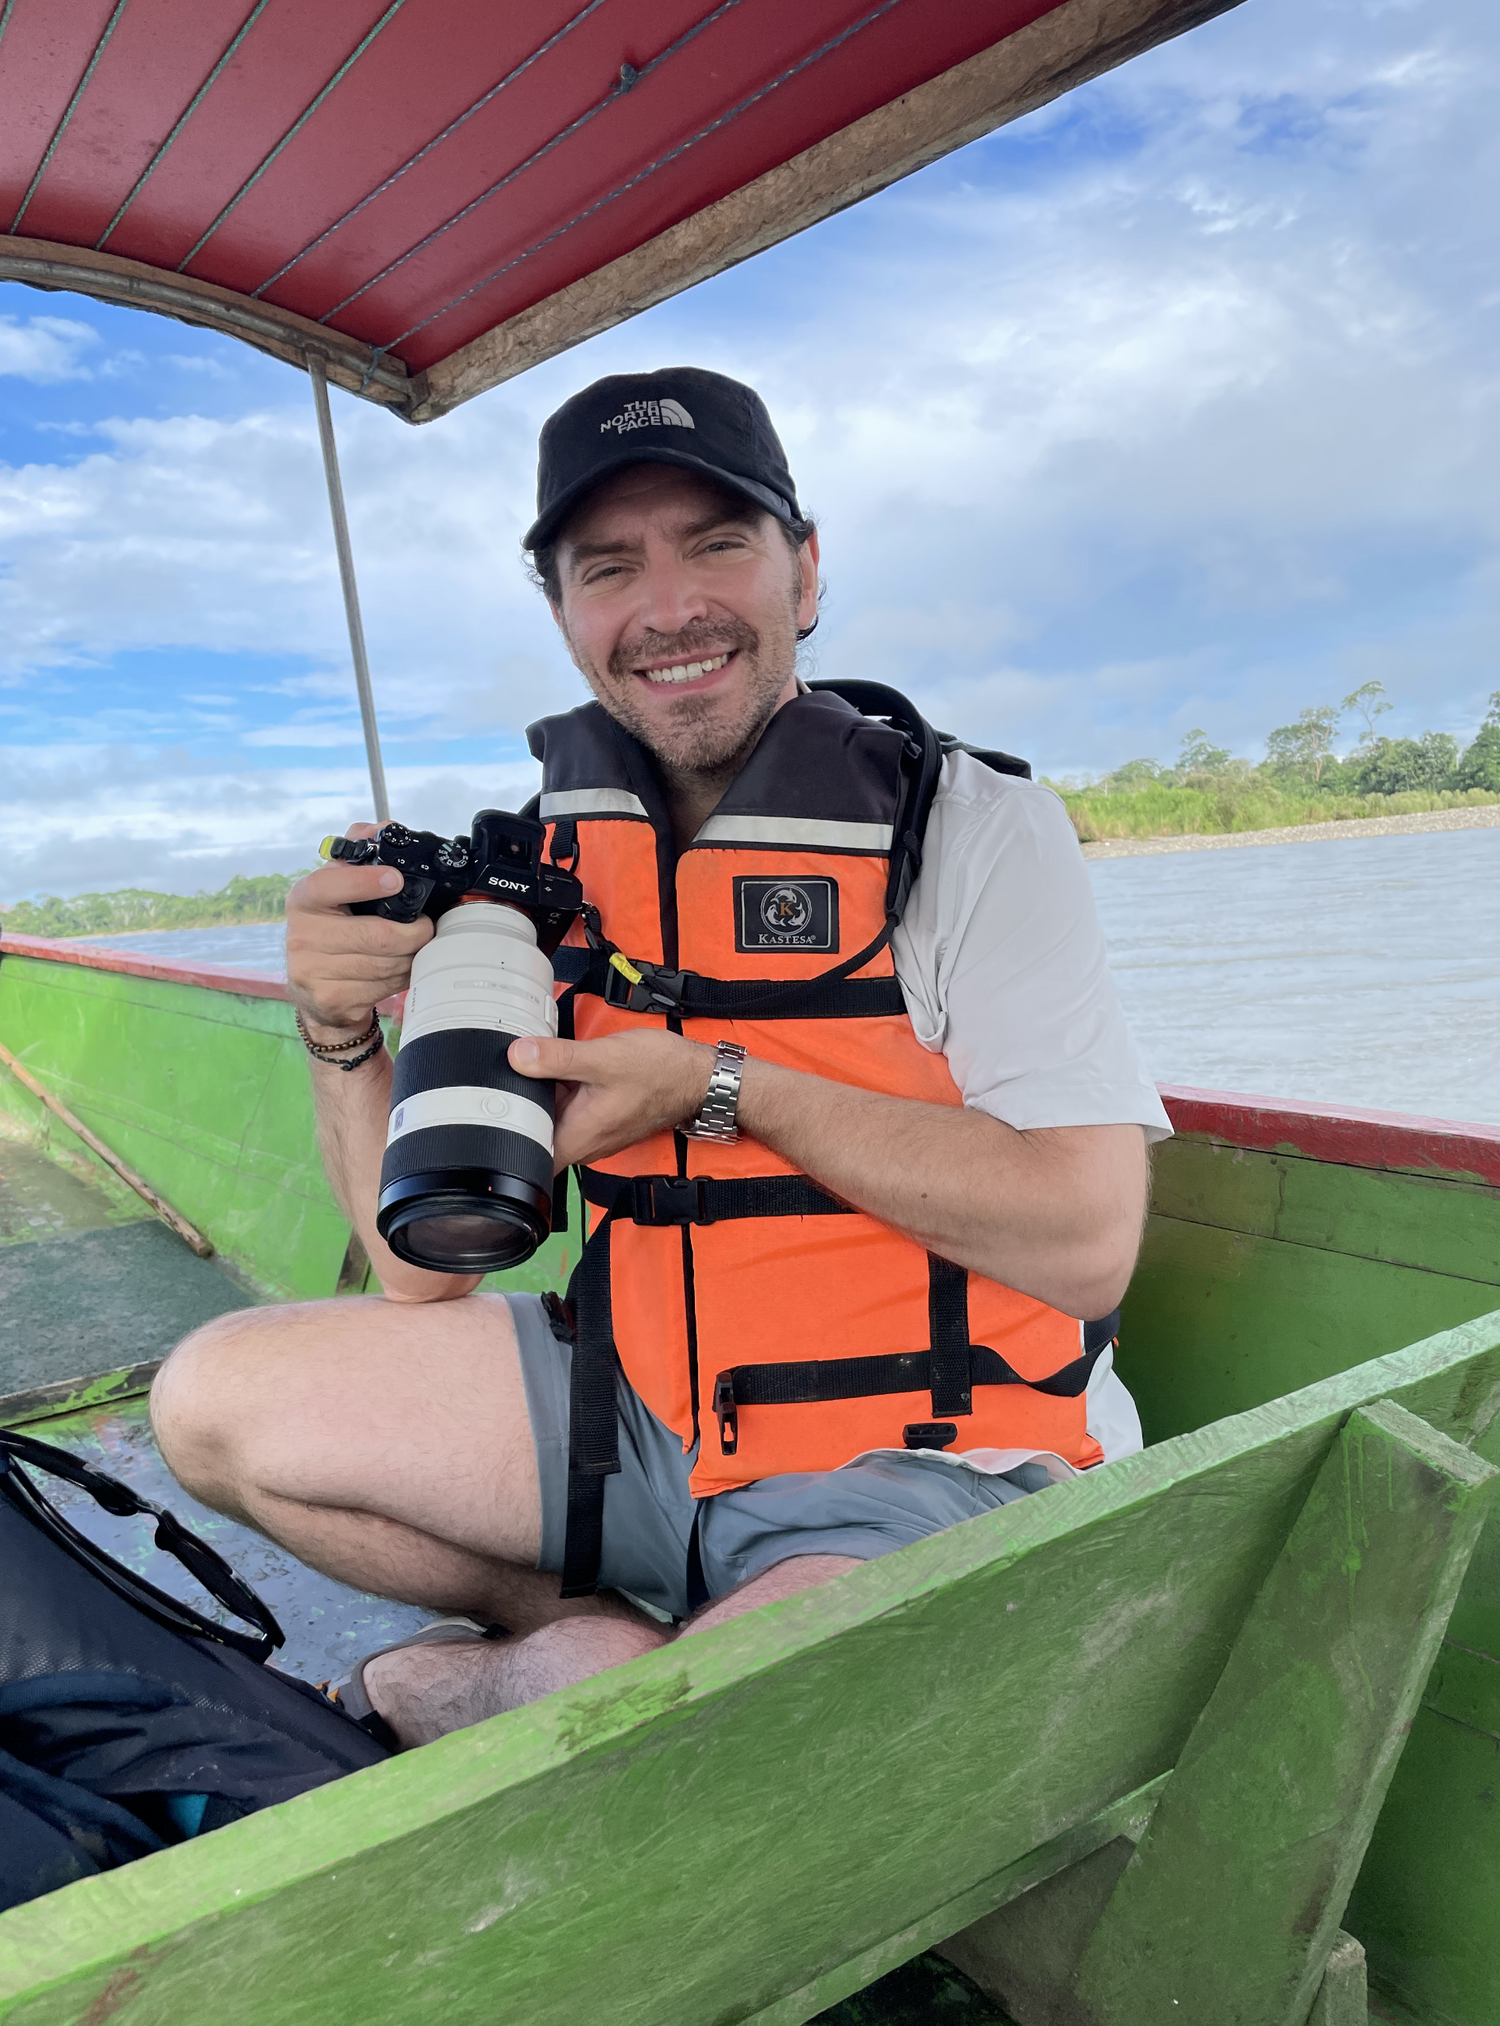 Sean cradles a Sony Camera with a long telephoto lens in both hands as he sits cross-legged in the bow of a colorful, wooden river boat wearing an orange life vest and baseball cap.